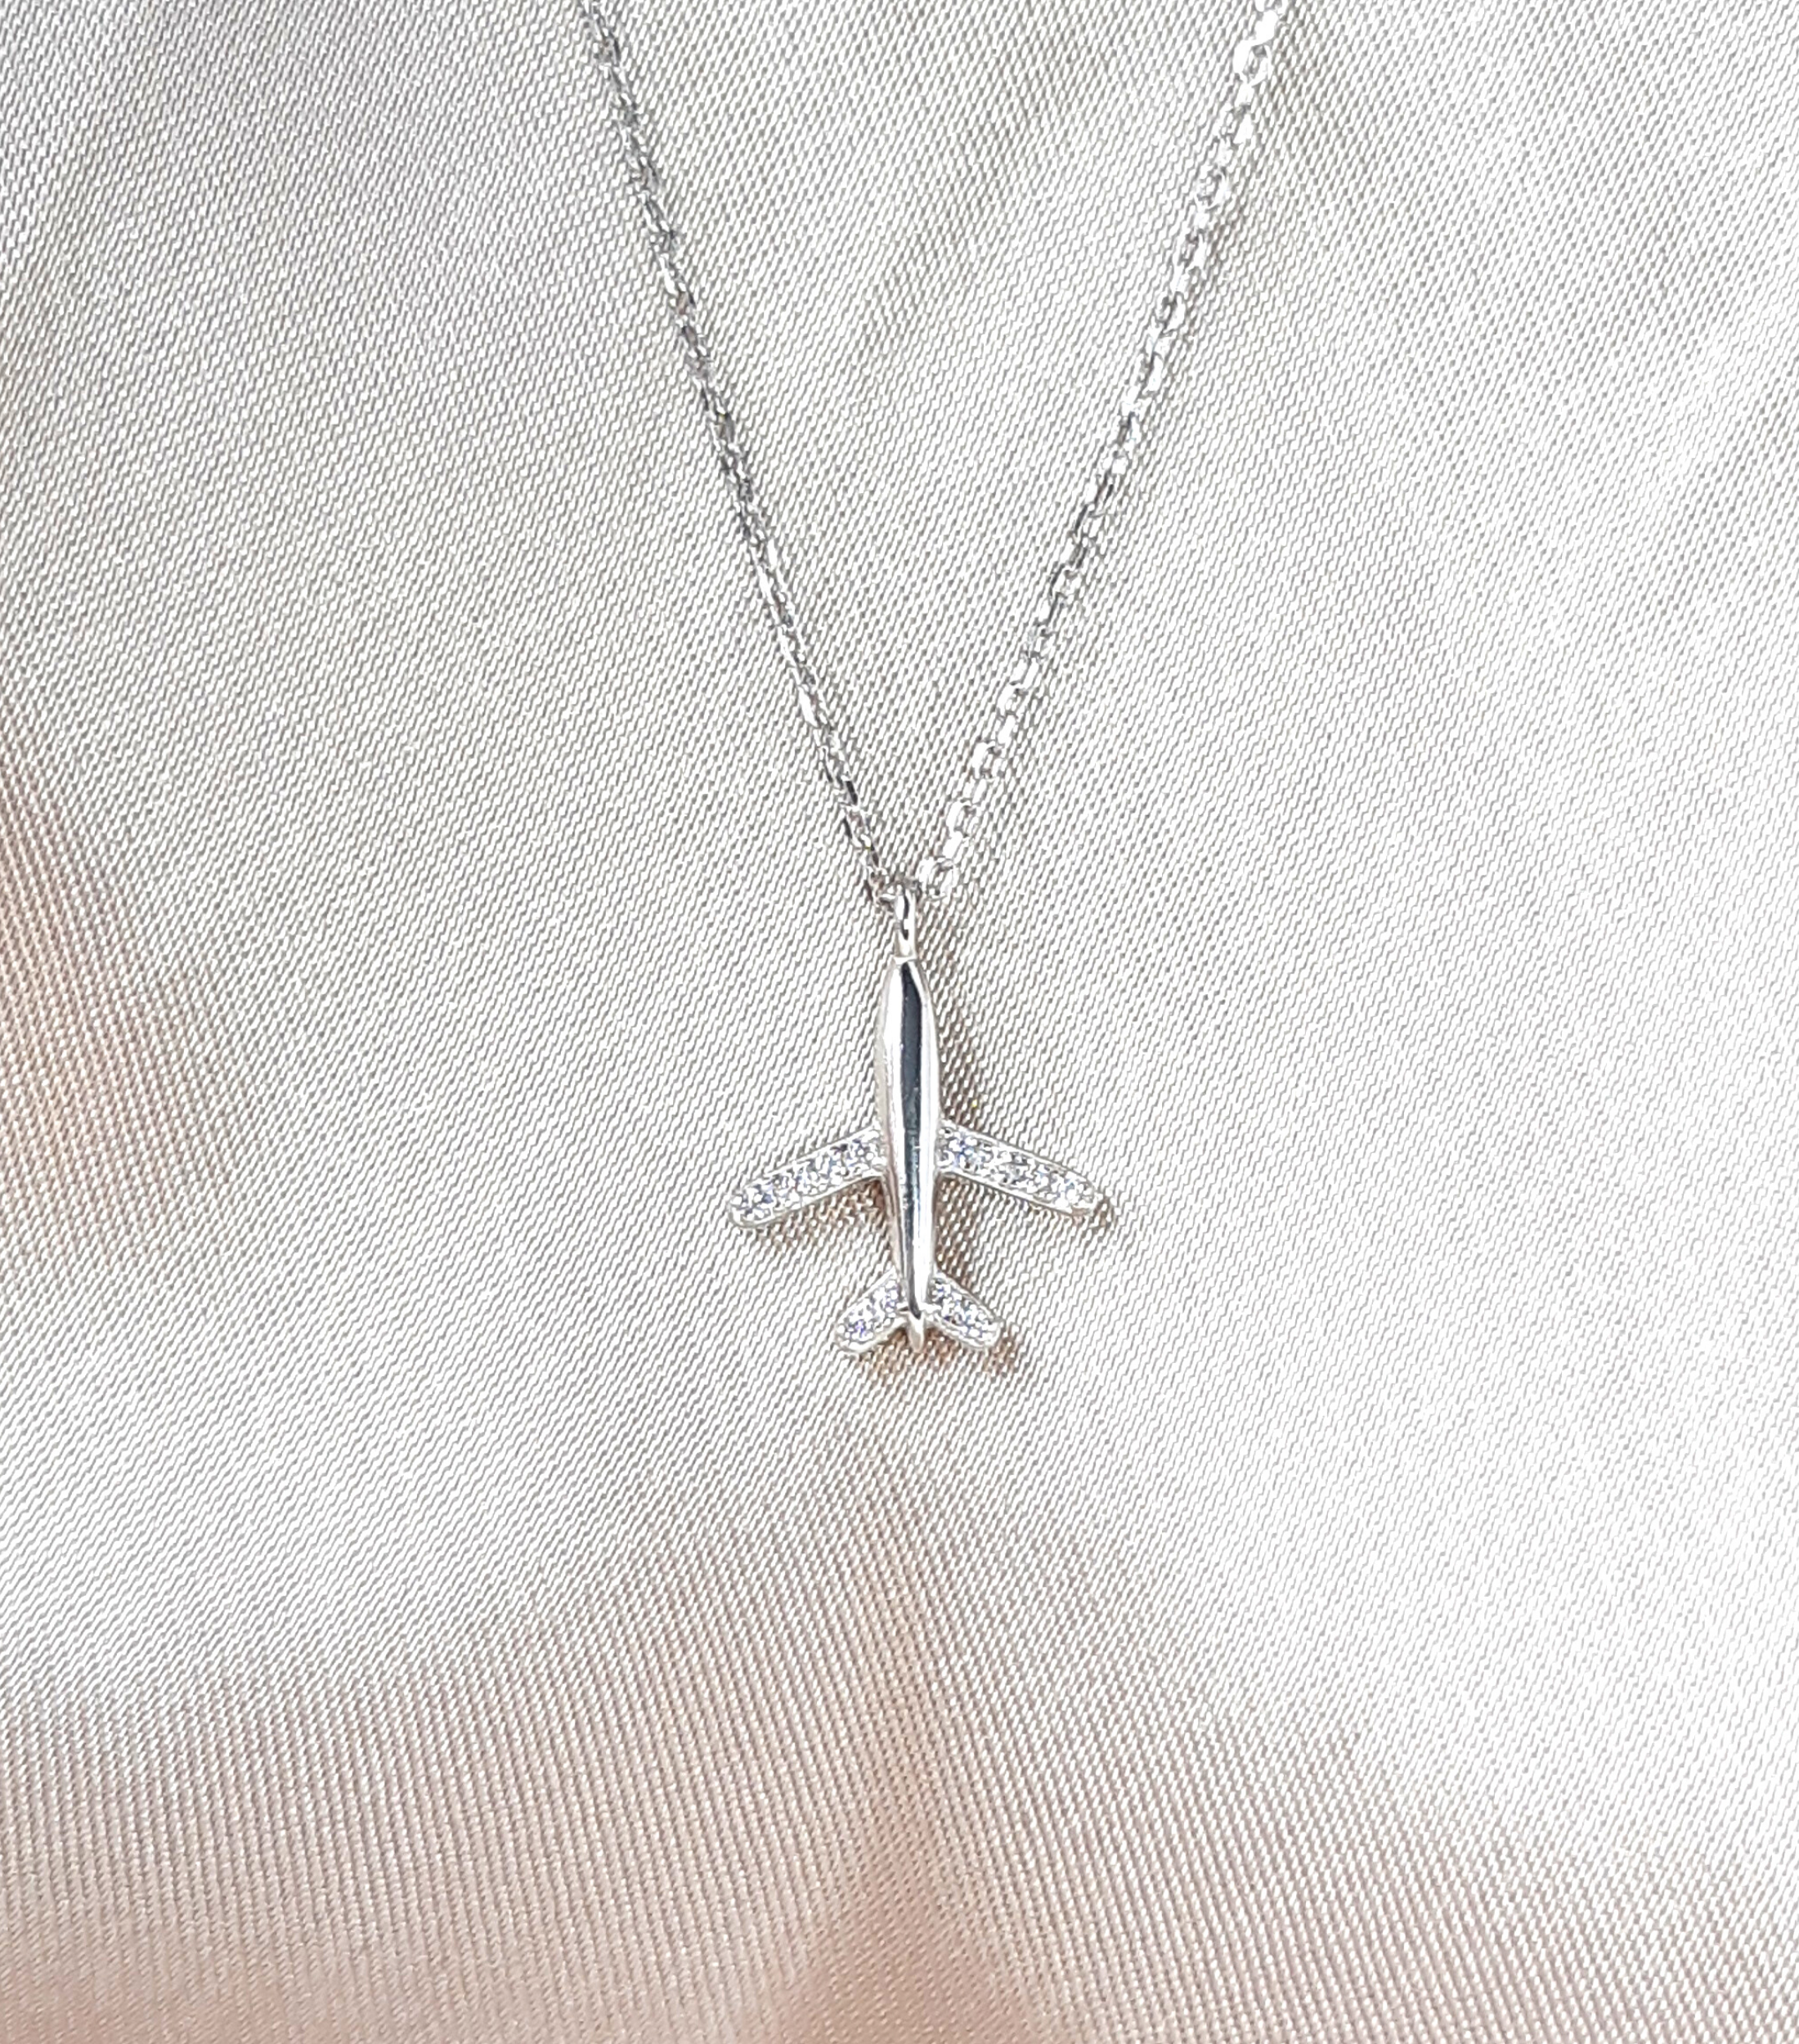 airplane couple necklace 2mm20 - ABS Pandora & Unisilver